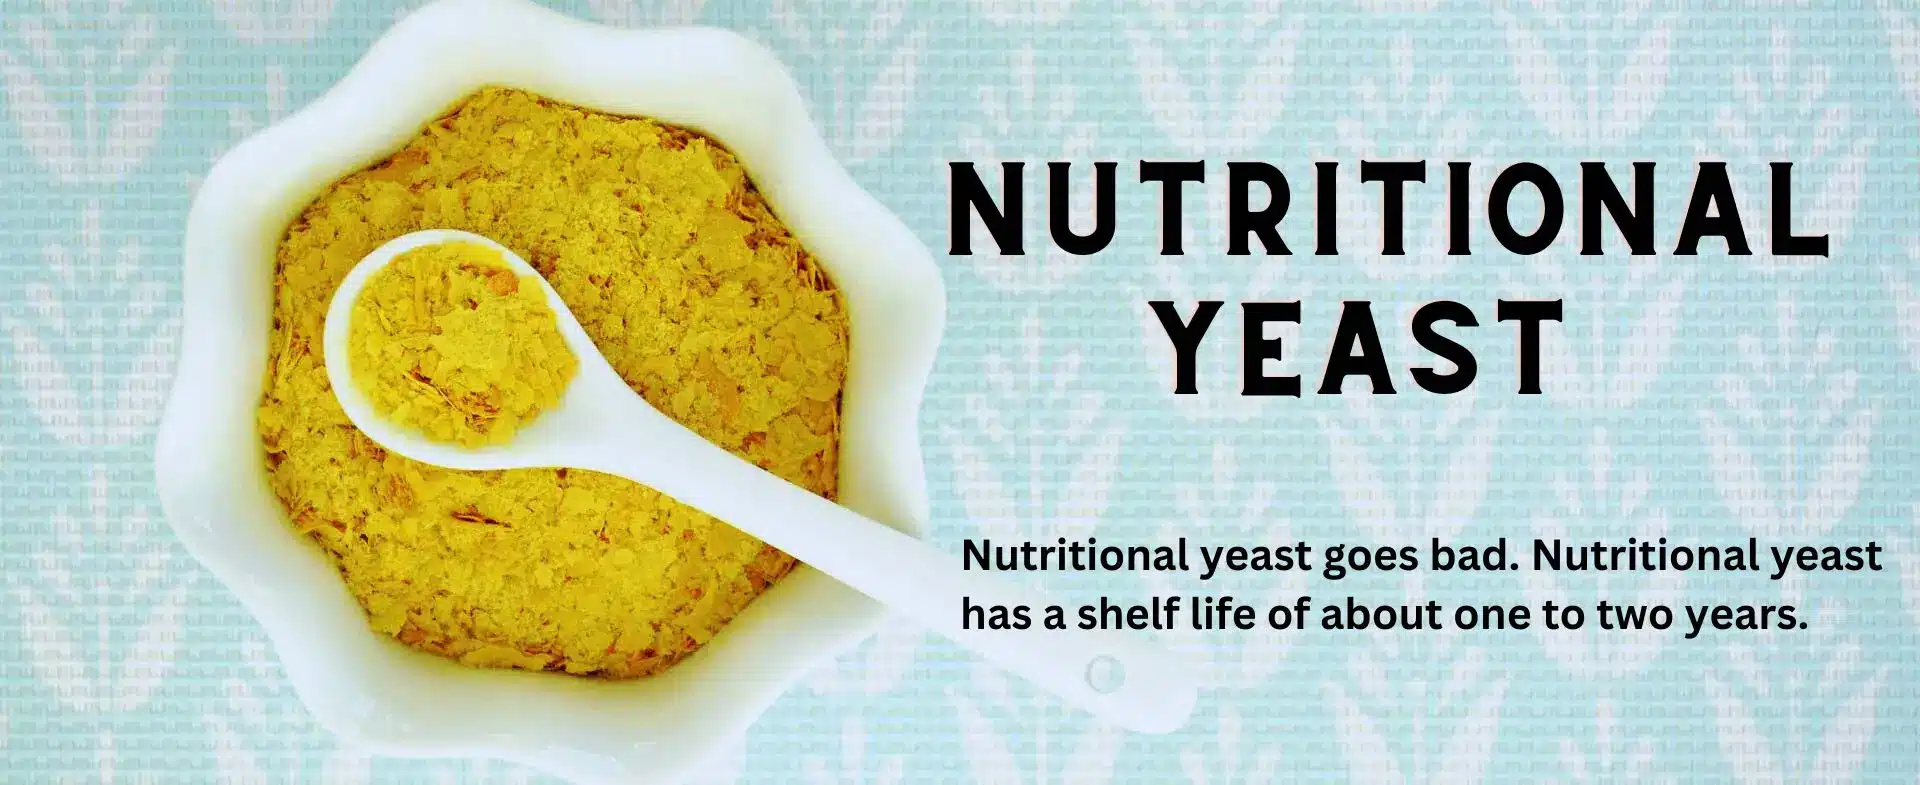 Does Nutritional Yeast Go Bad